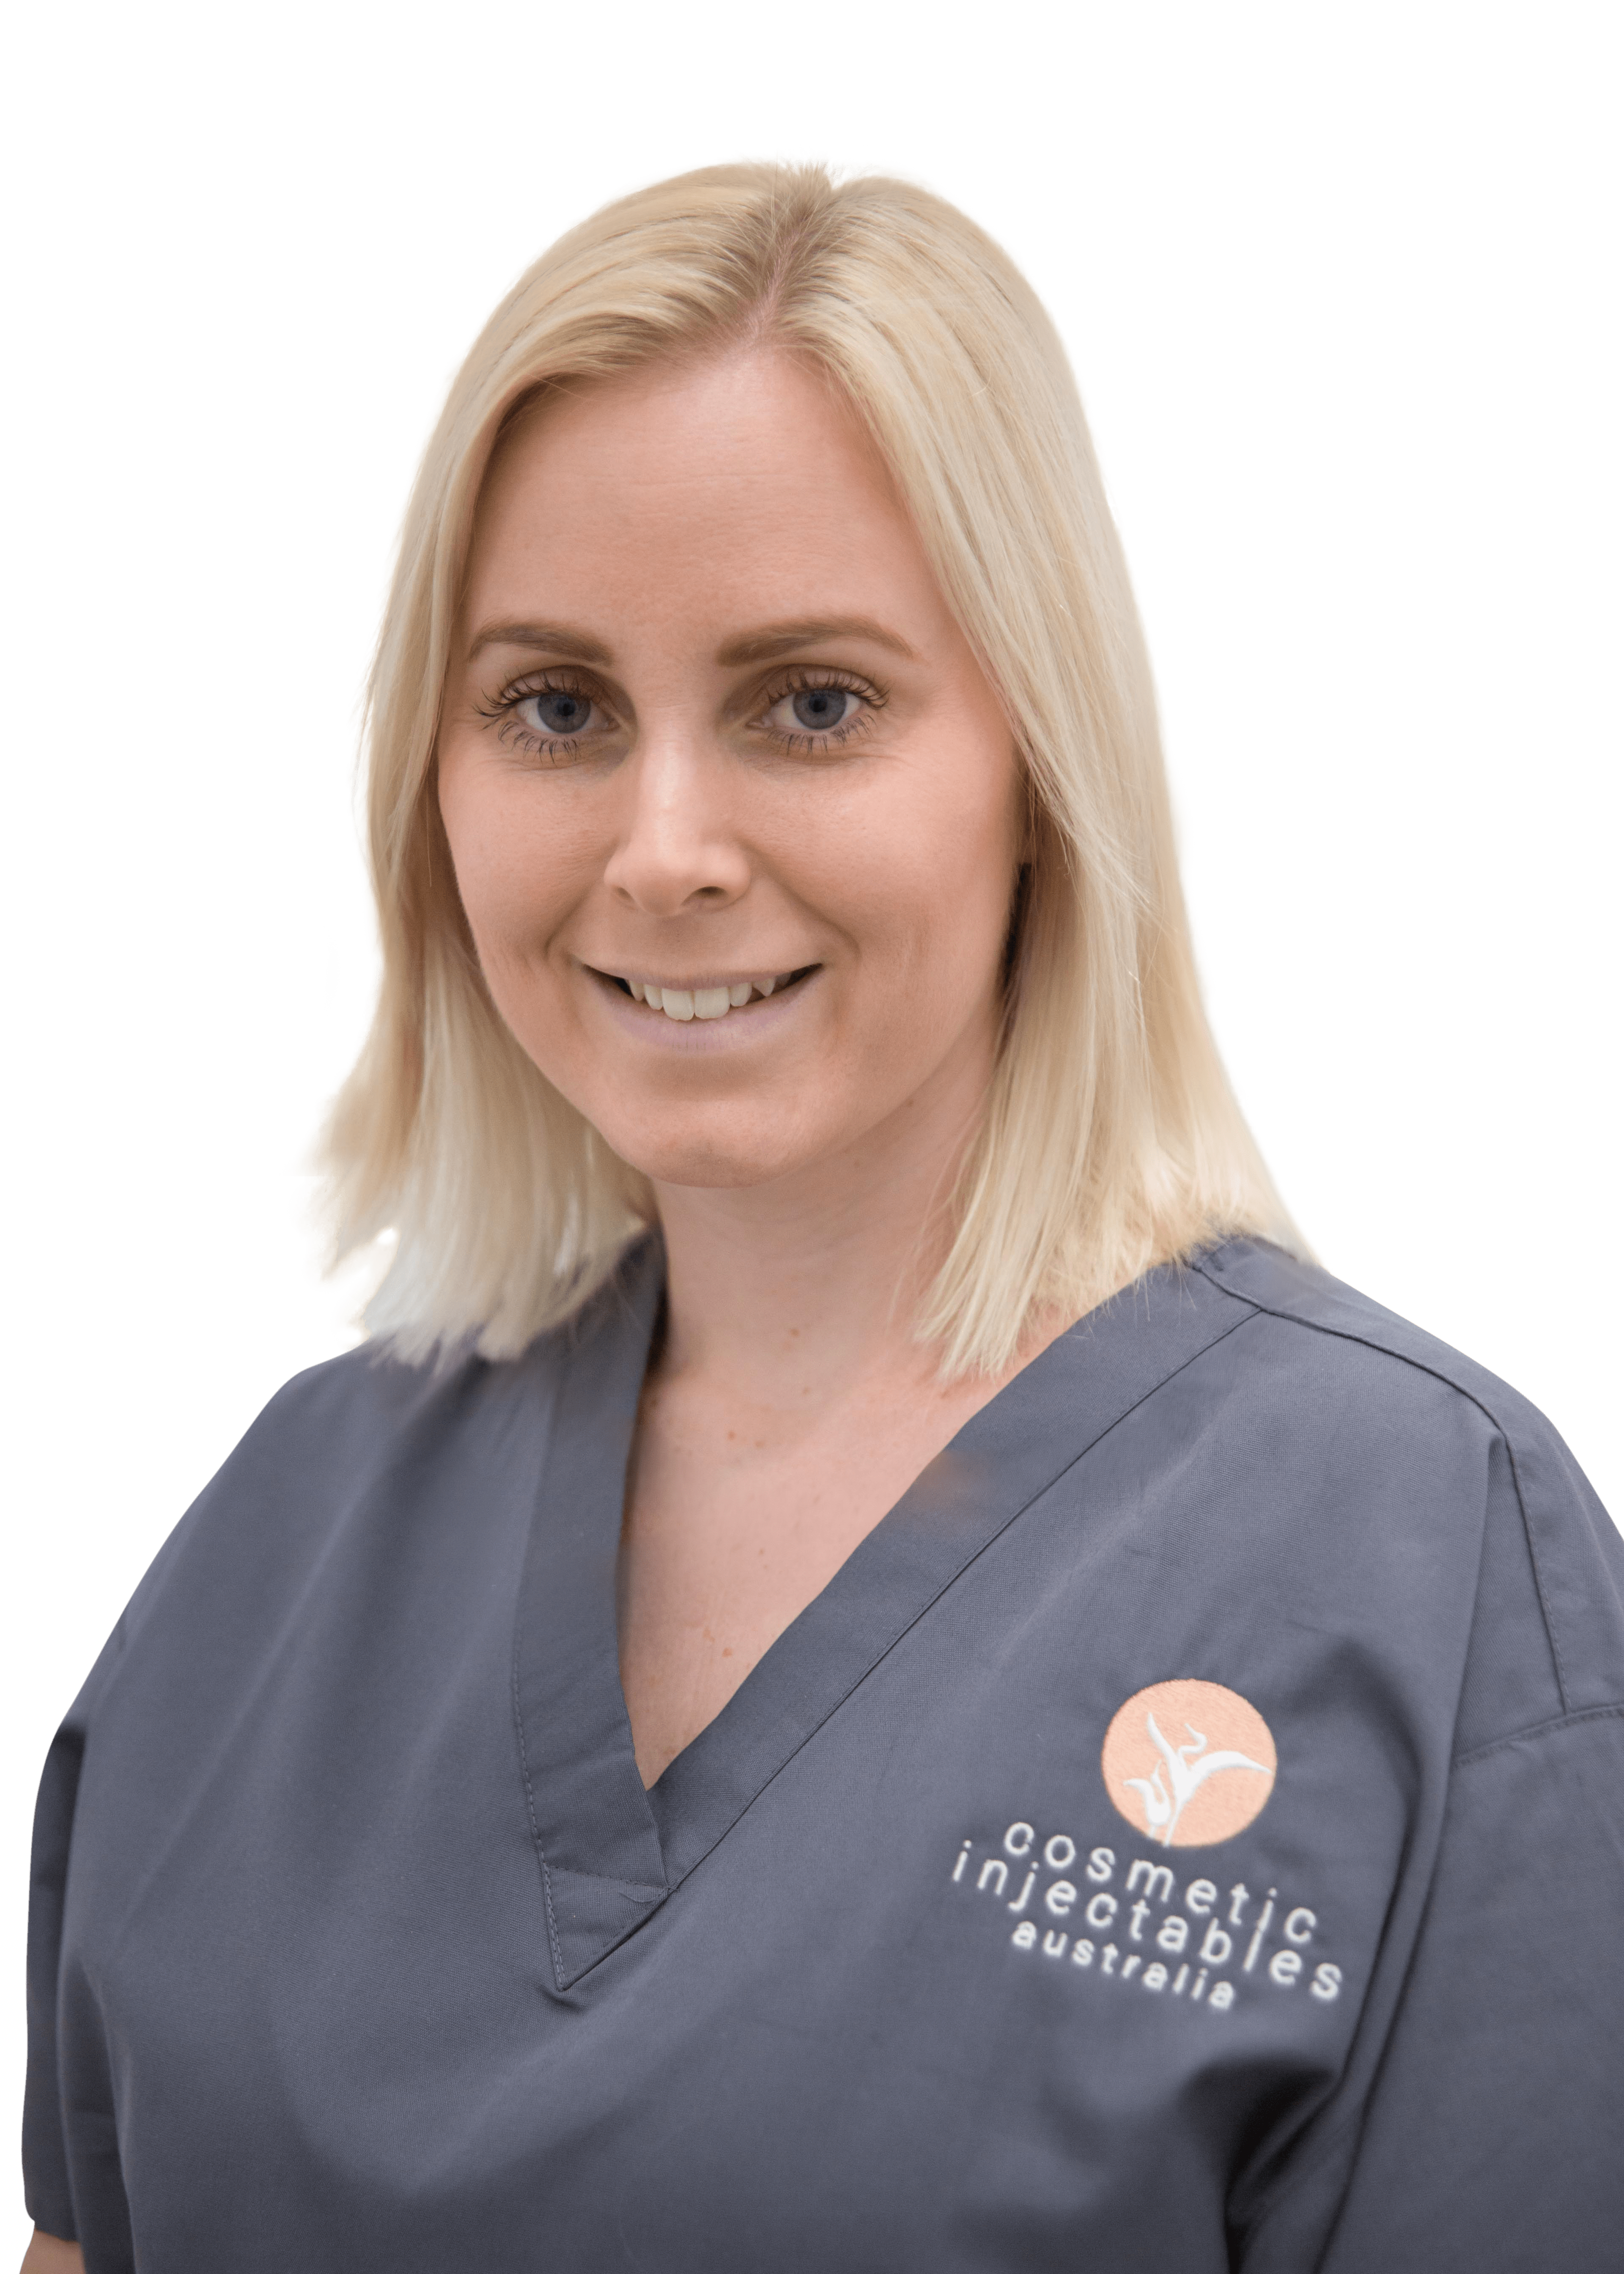 Jessica Whalley Cosmetic Nurse registration number: NMW0001470678